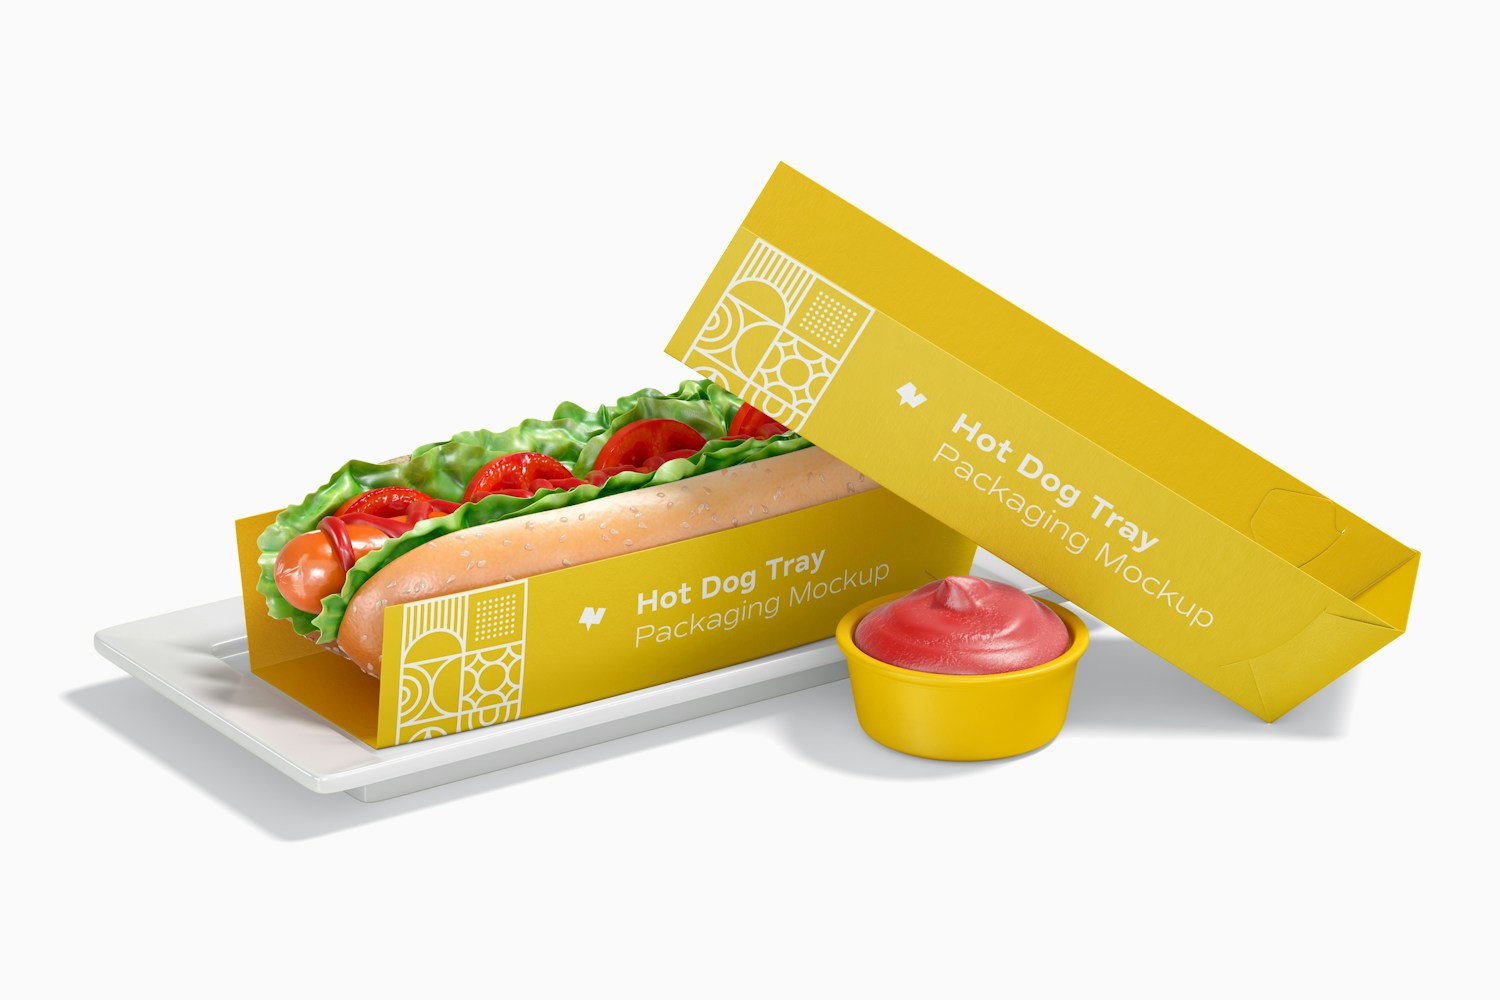 Hot Dog Tray Packaging Mockup, Front View